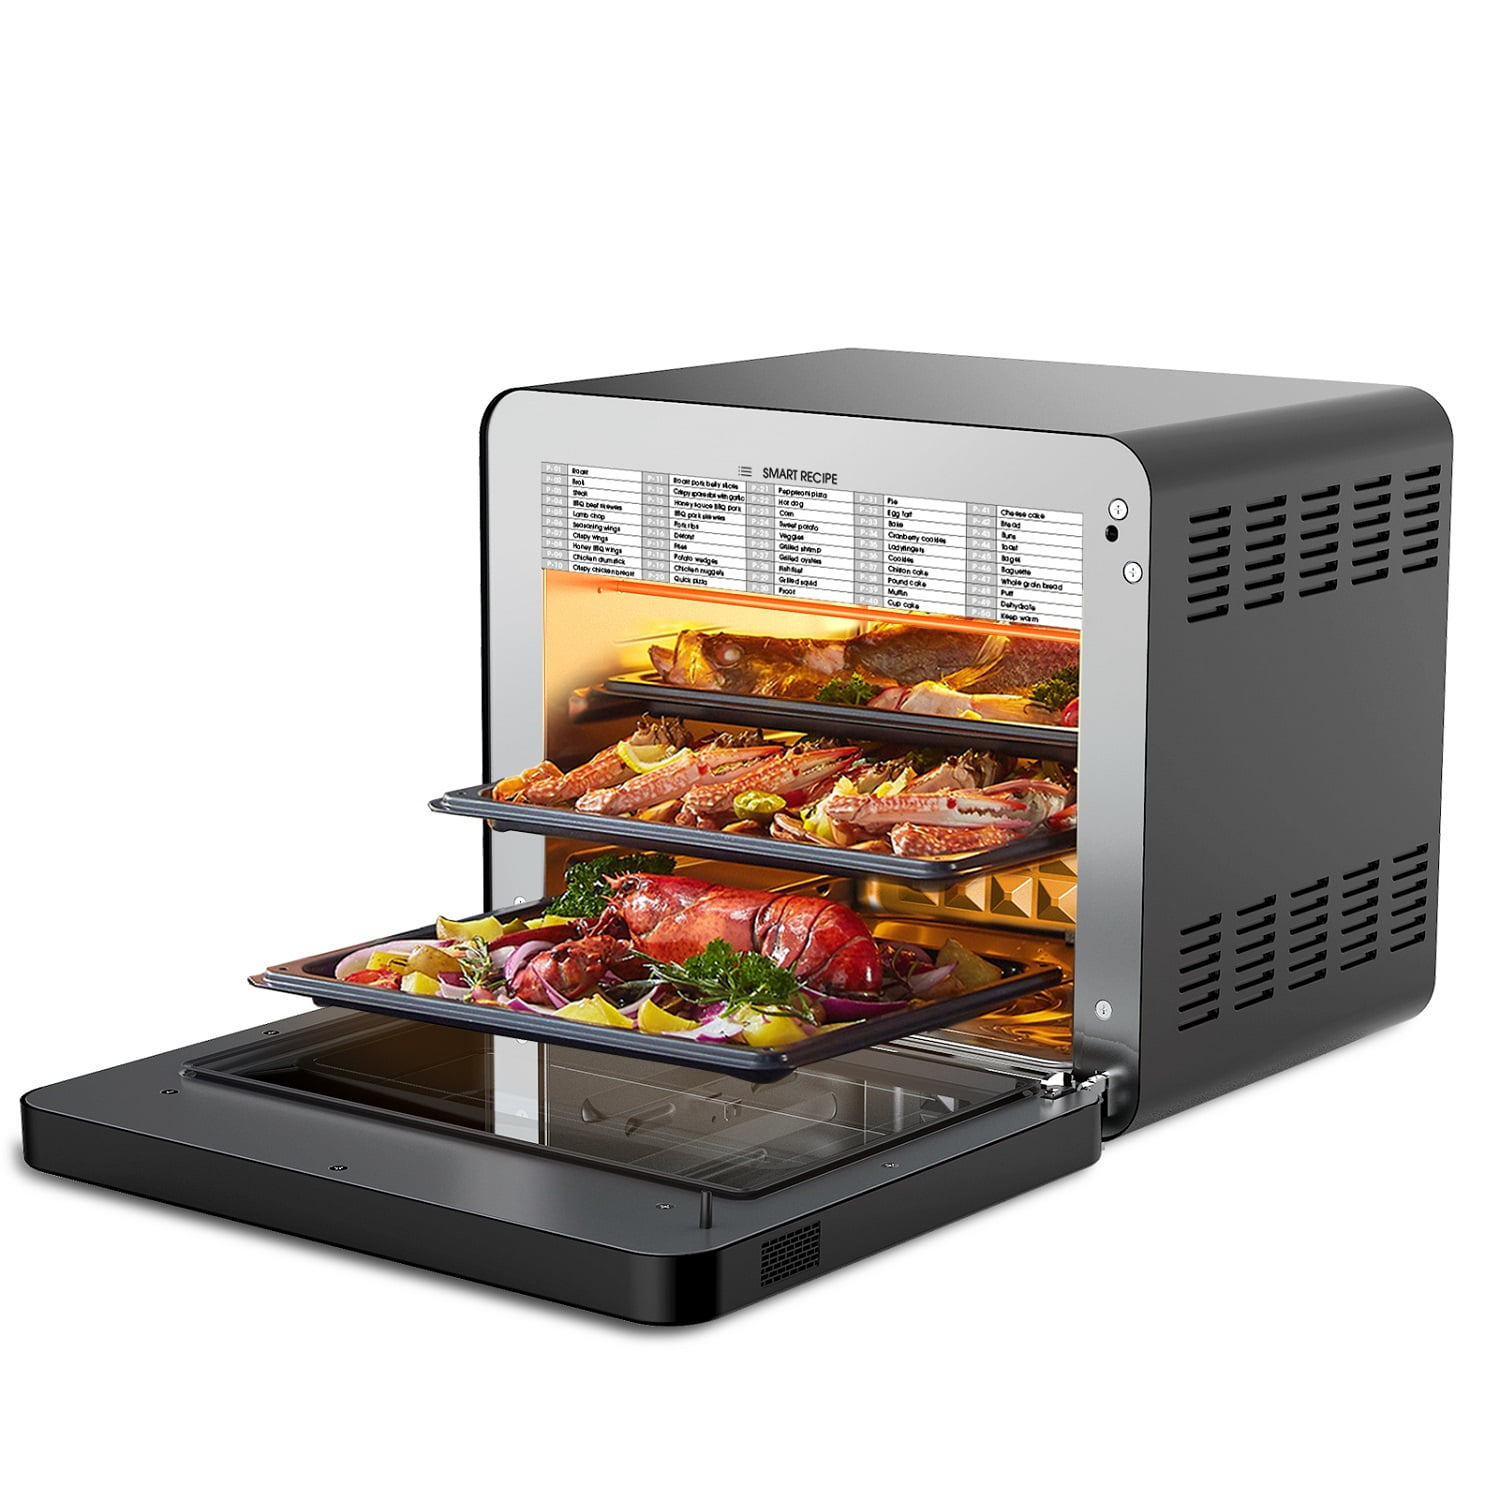 Tafole 26 qt. Black Steam Air Fryer Toaster Oven with 50 Cooking Presets Menus, Accessories Included